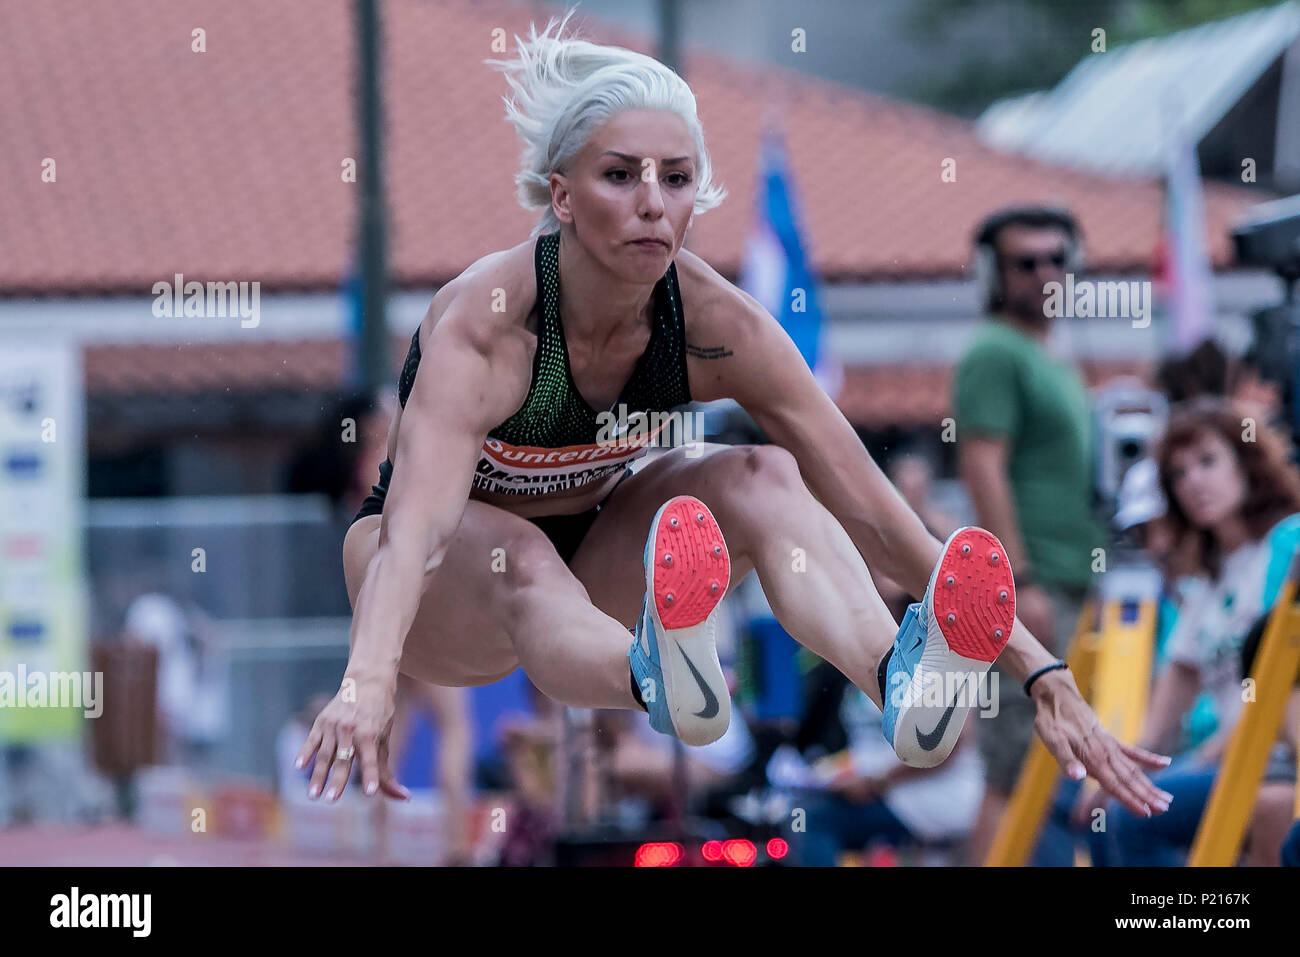 Athens, Greece. 13th June, 2018. Paraskevi Papachristou of Greece competes in Long Jump at the Filothei Women Gala in Athens, Greece, June 13, 2018. Credit: Panagiotis Moschandreou/Xinhua/Alamy Live News Stock Photo